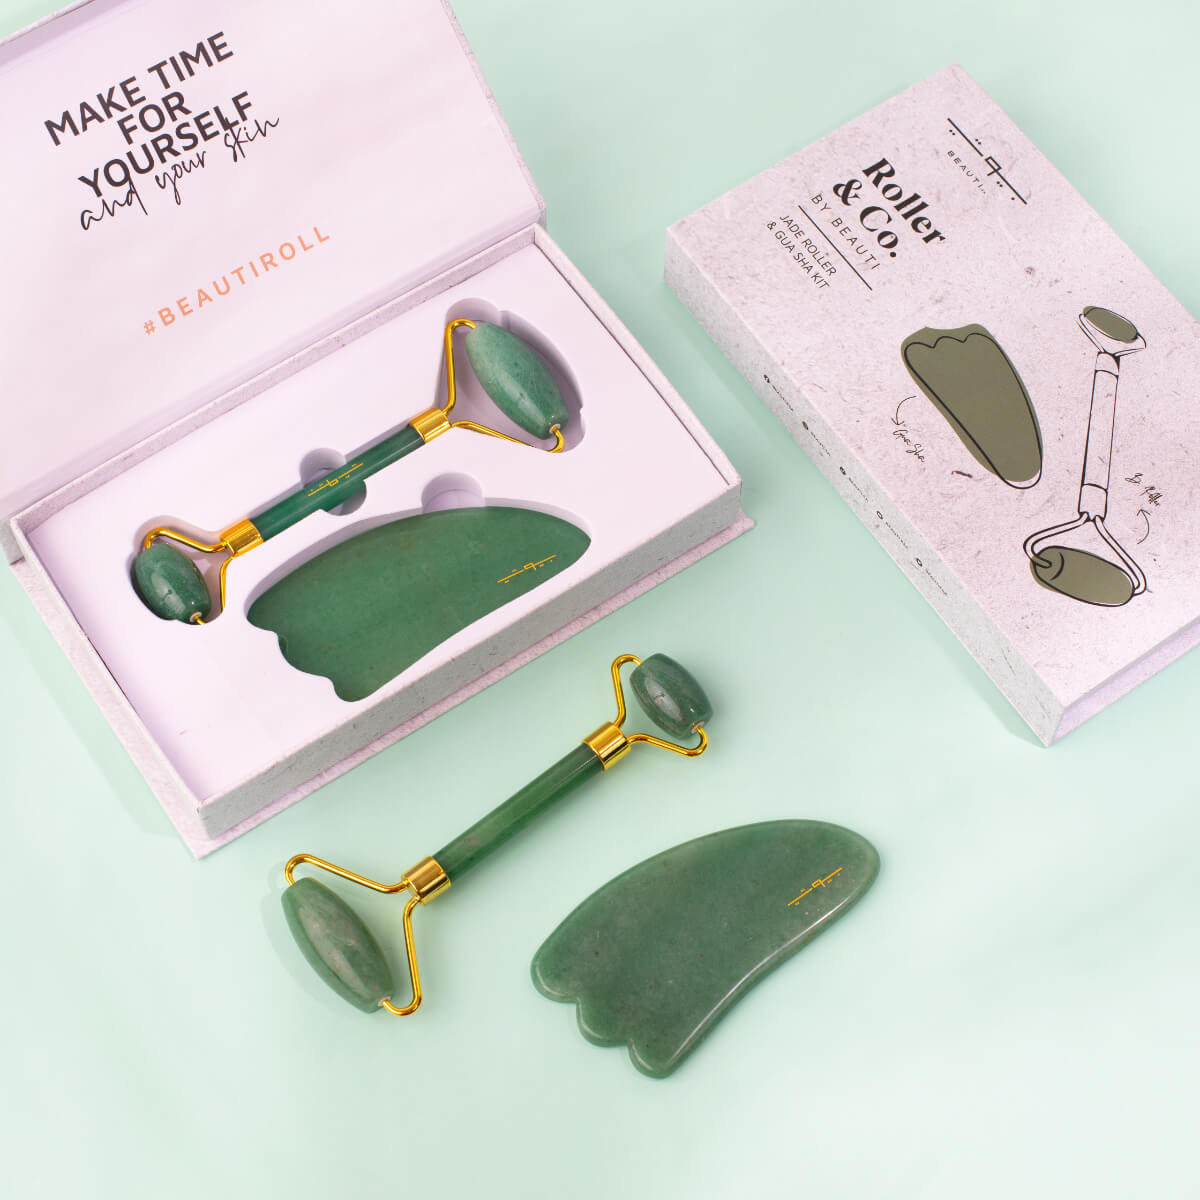 Roller & Co. by BEAUTI Jade Roller Guasha Set - Face Body Roller, Massager, Skin Firming and Skin Care Tool Kit